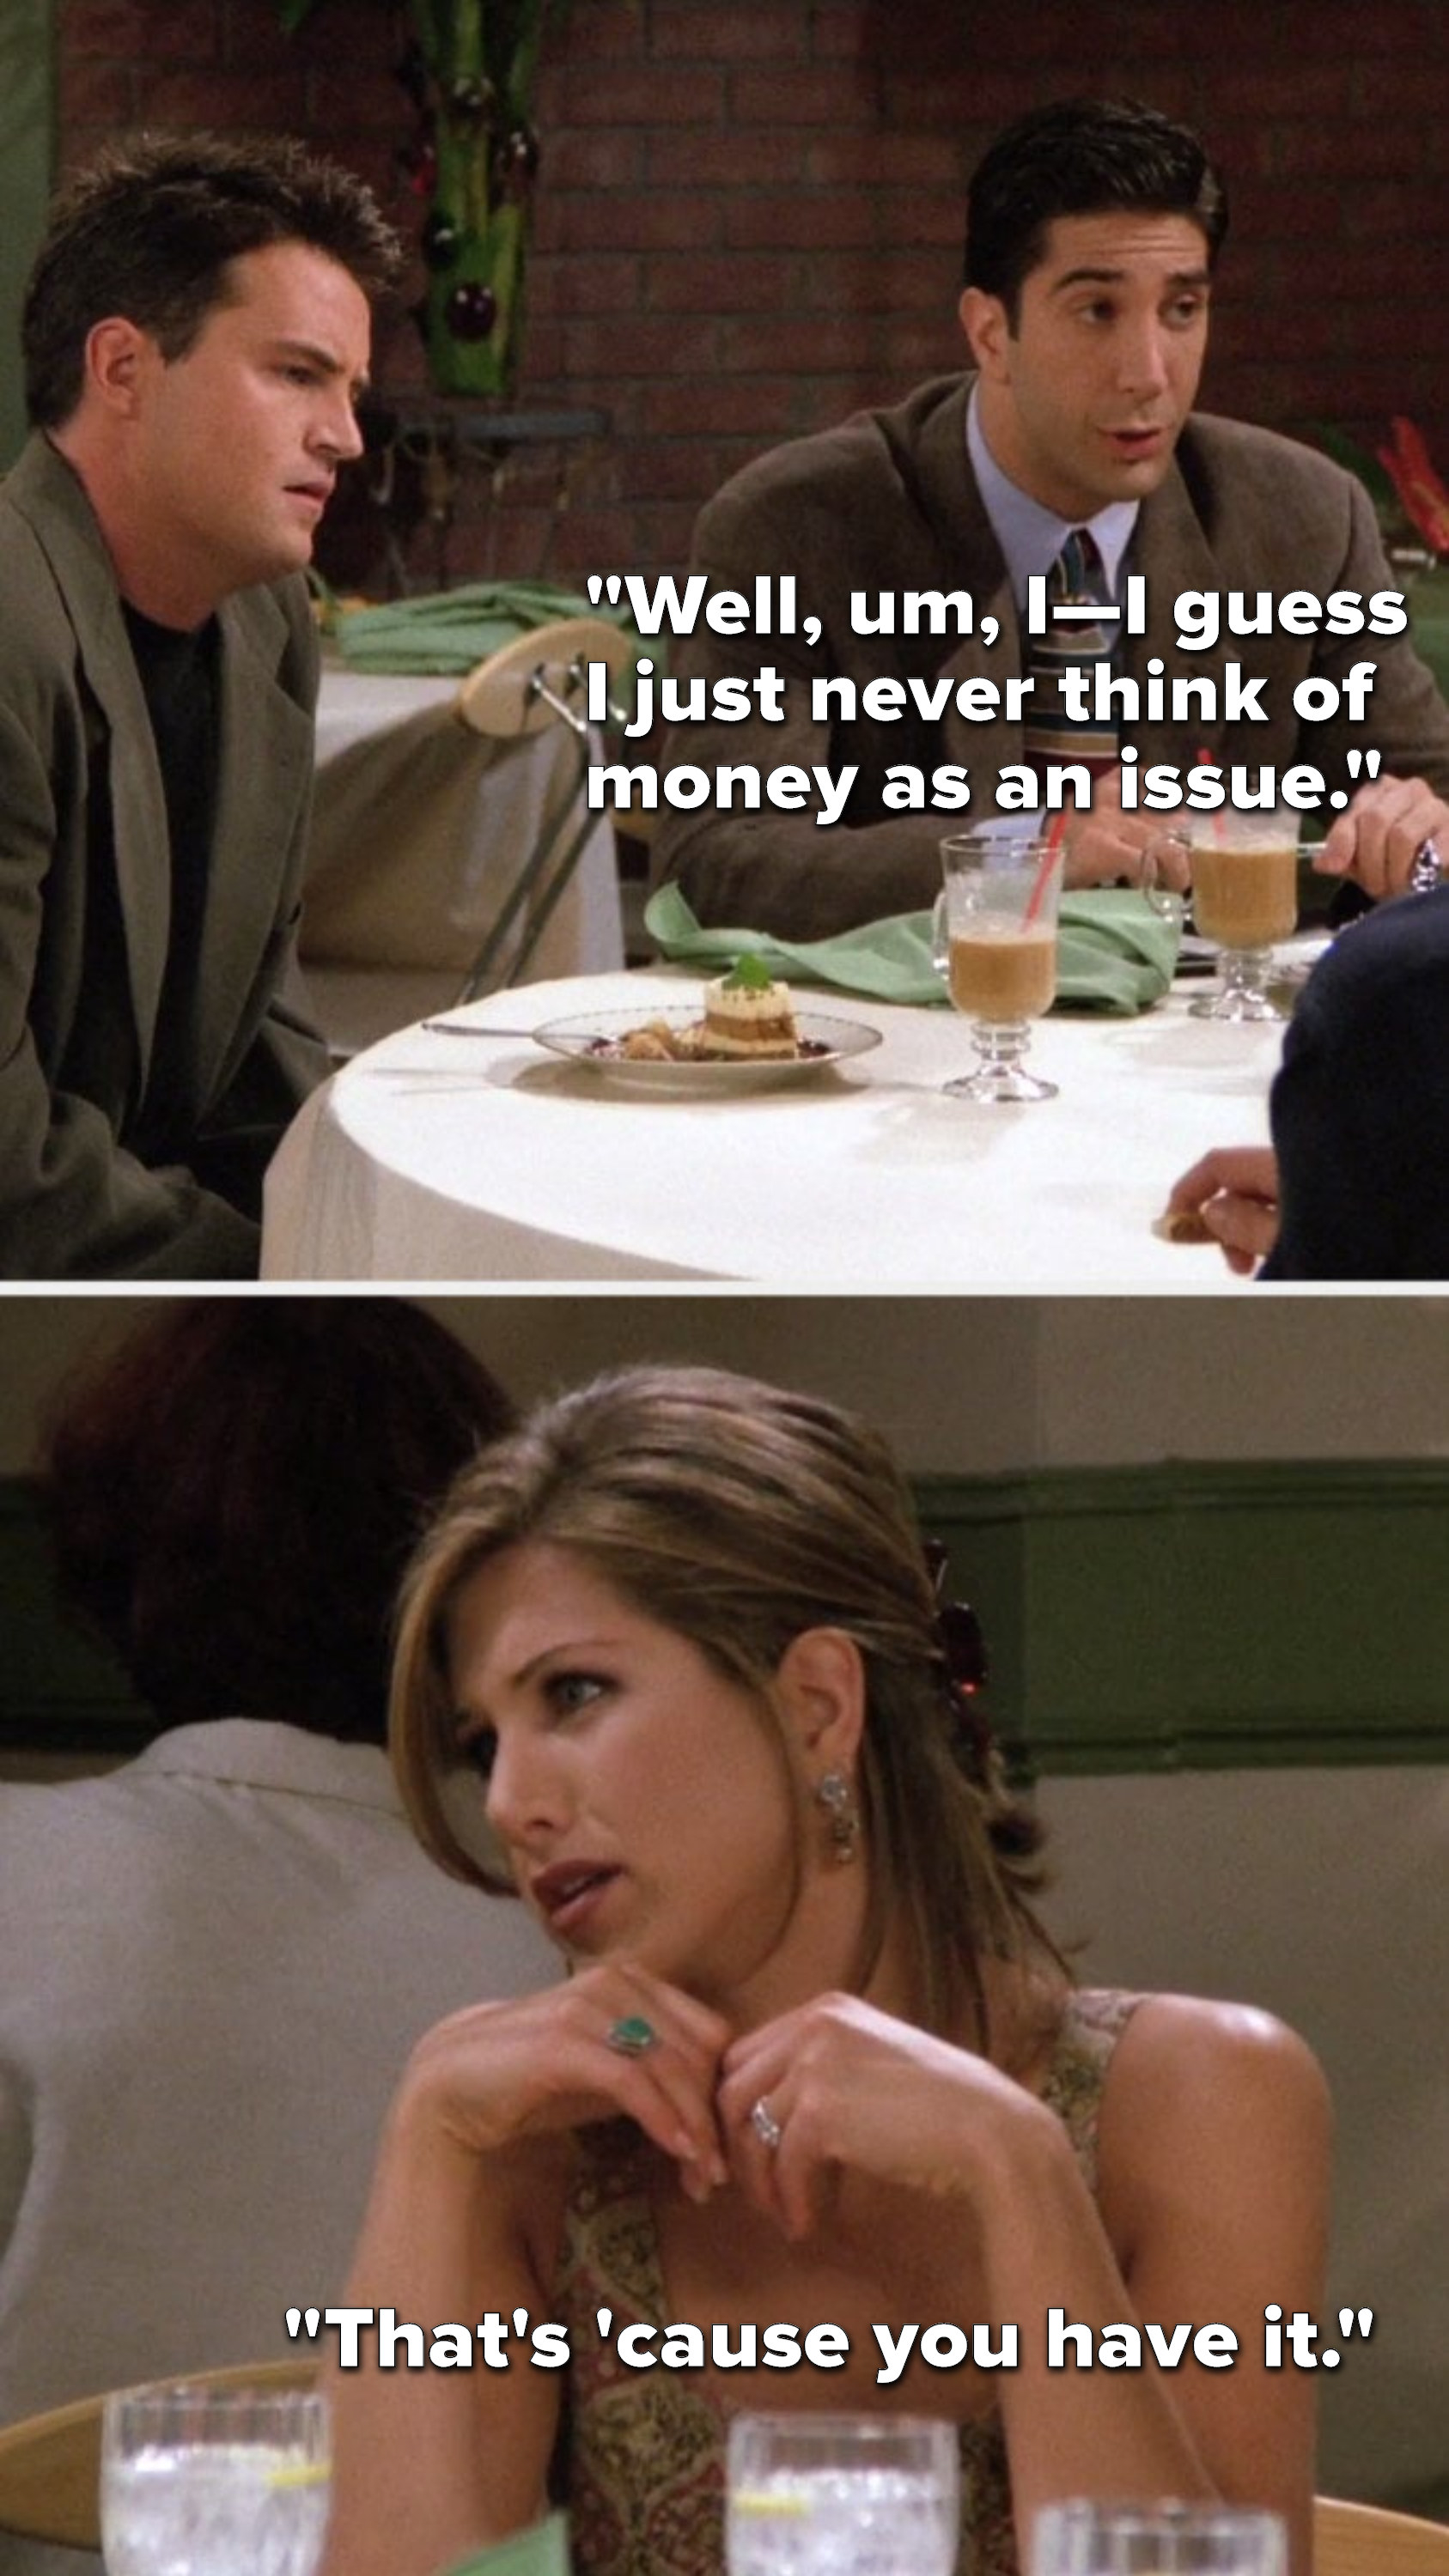 Ross says, &quot;Well, um, I—I guess I just never think of money as an issue,&quot; and Rachel says, &quot;That&#x27;s &#x27;cause you have it&quot;